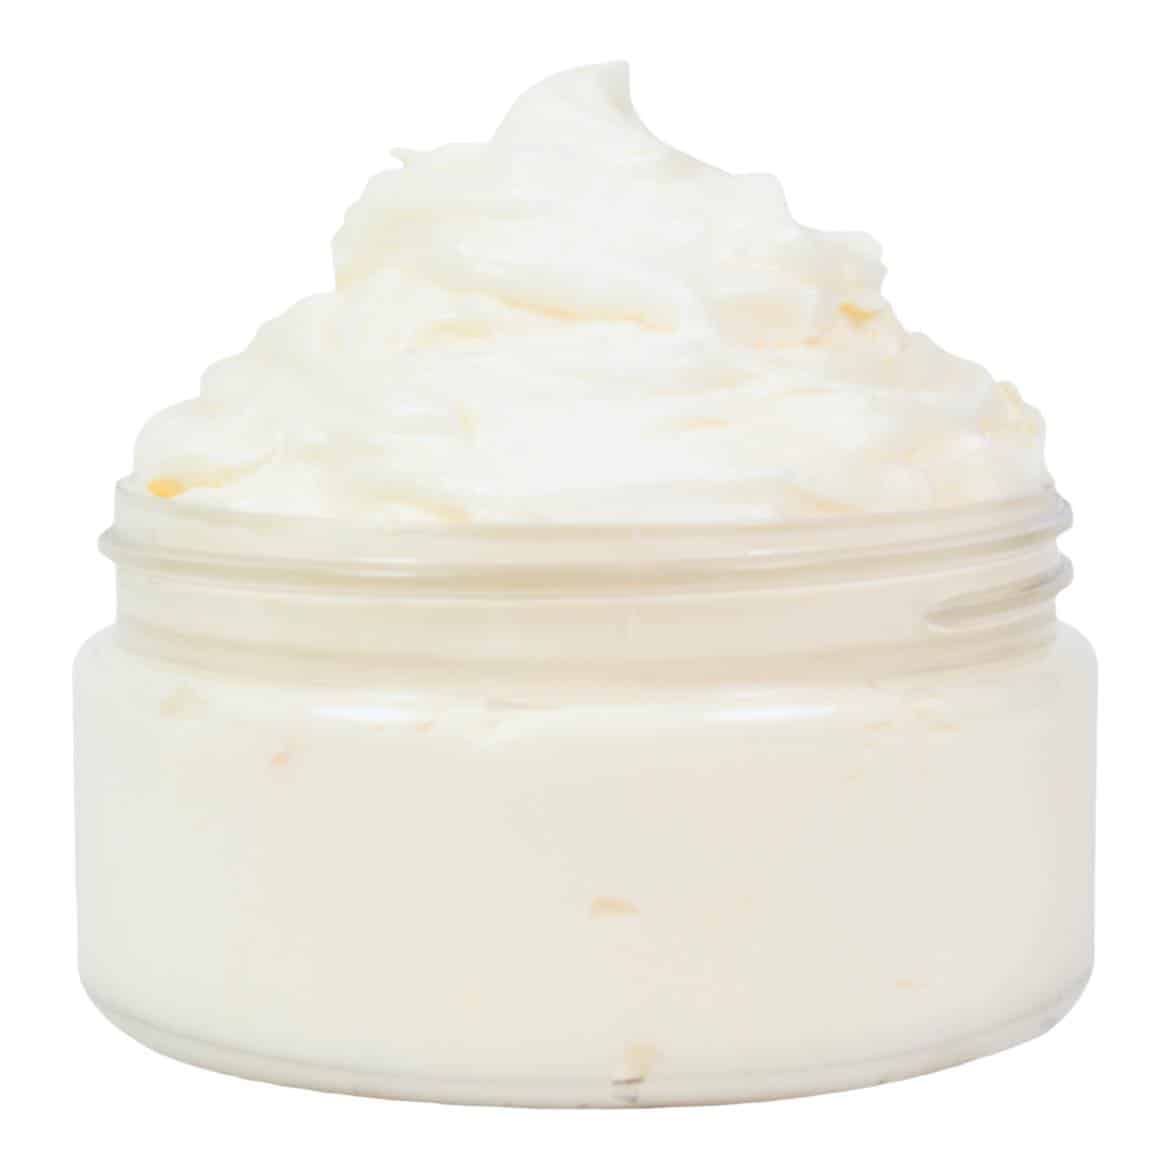 Body Butter Making Assessment Mixed Scents